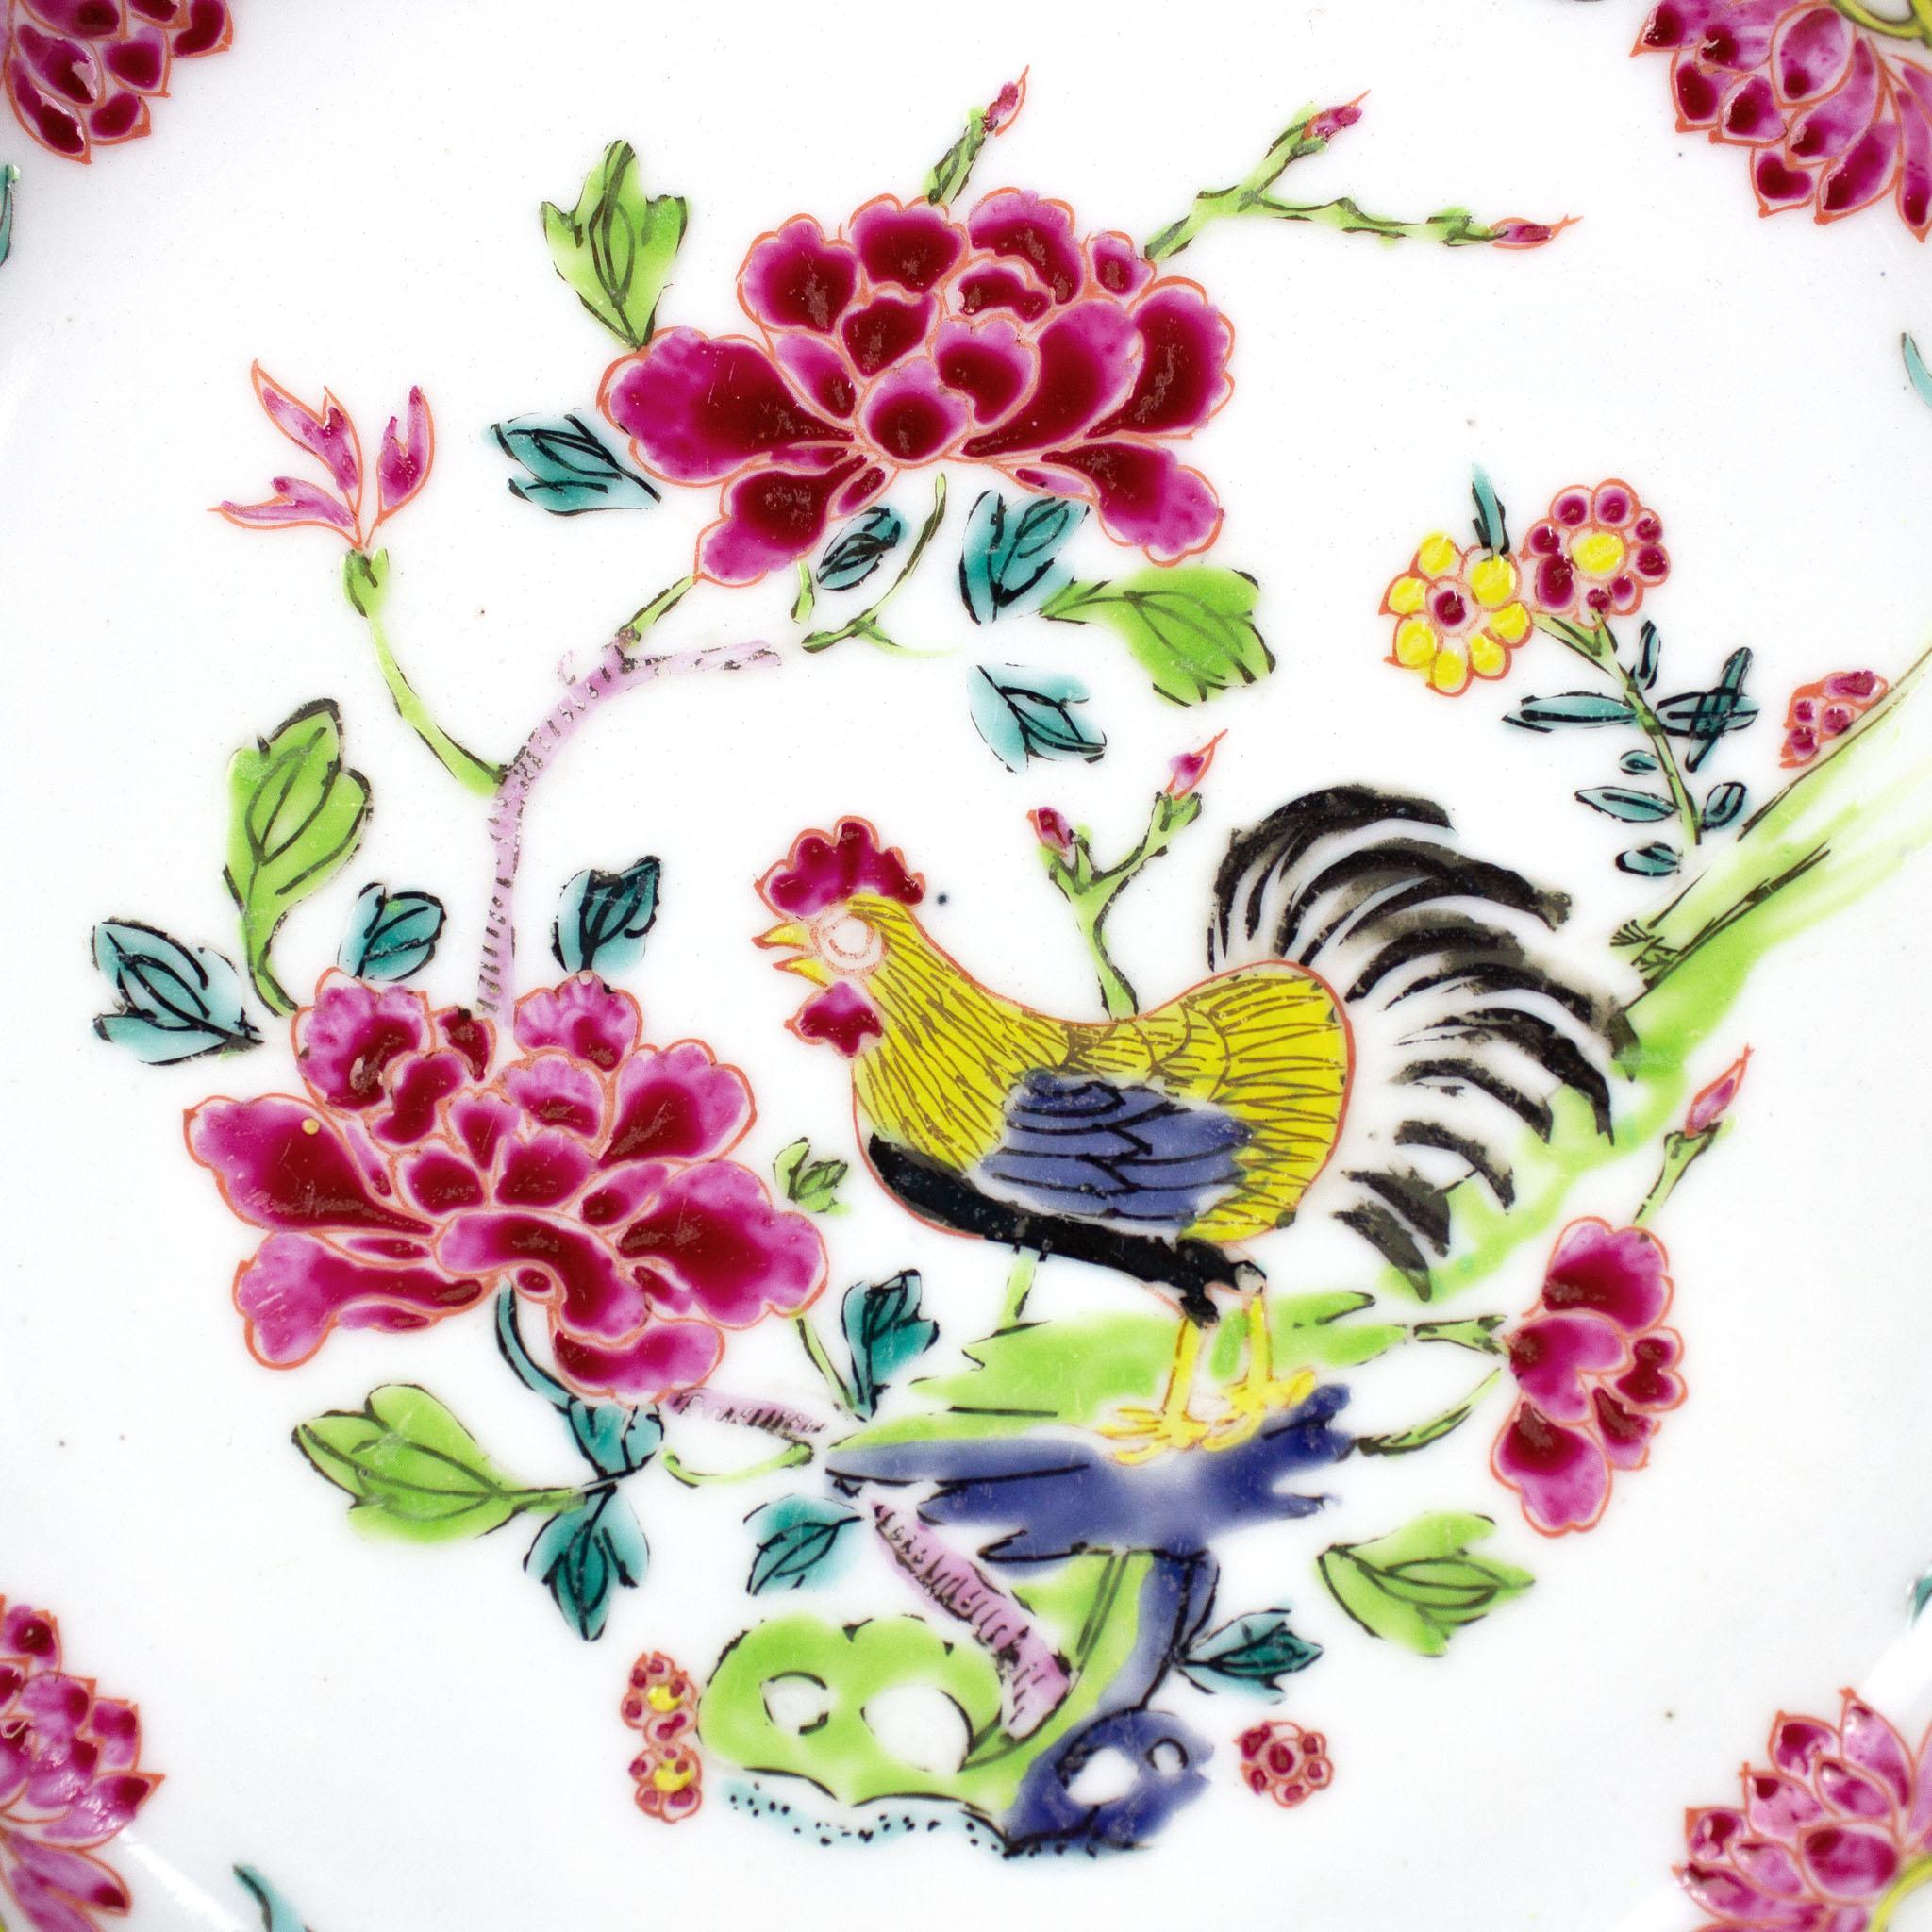 Small Chinese porcelain dish, East India Company, Yongzheng Period (1723-1735). Polychrome decoration depicting in the centre a cock, animal of good omen and good luck, three peonies, considered the queen of flowers and symbol of Spring, and others